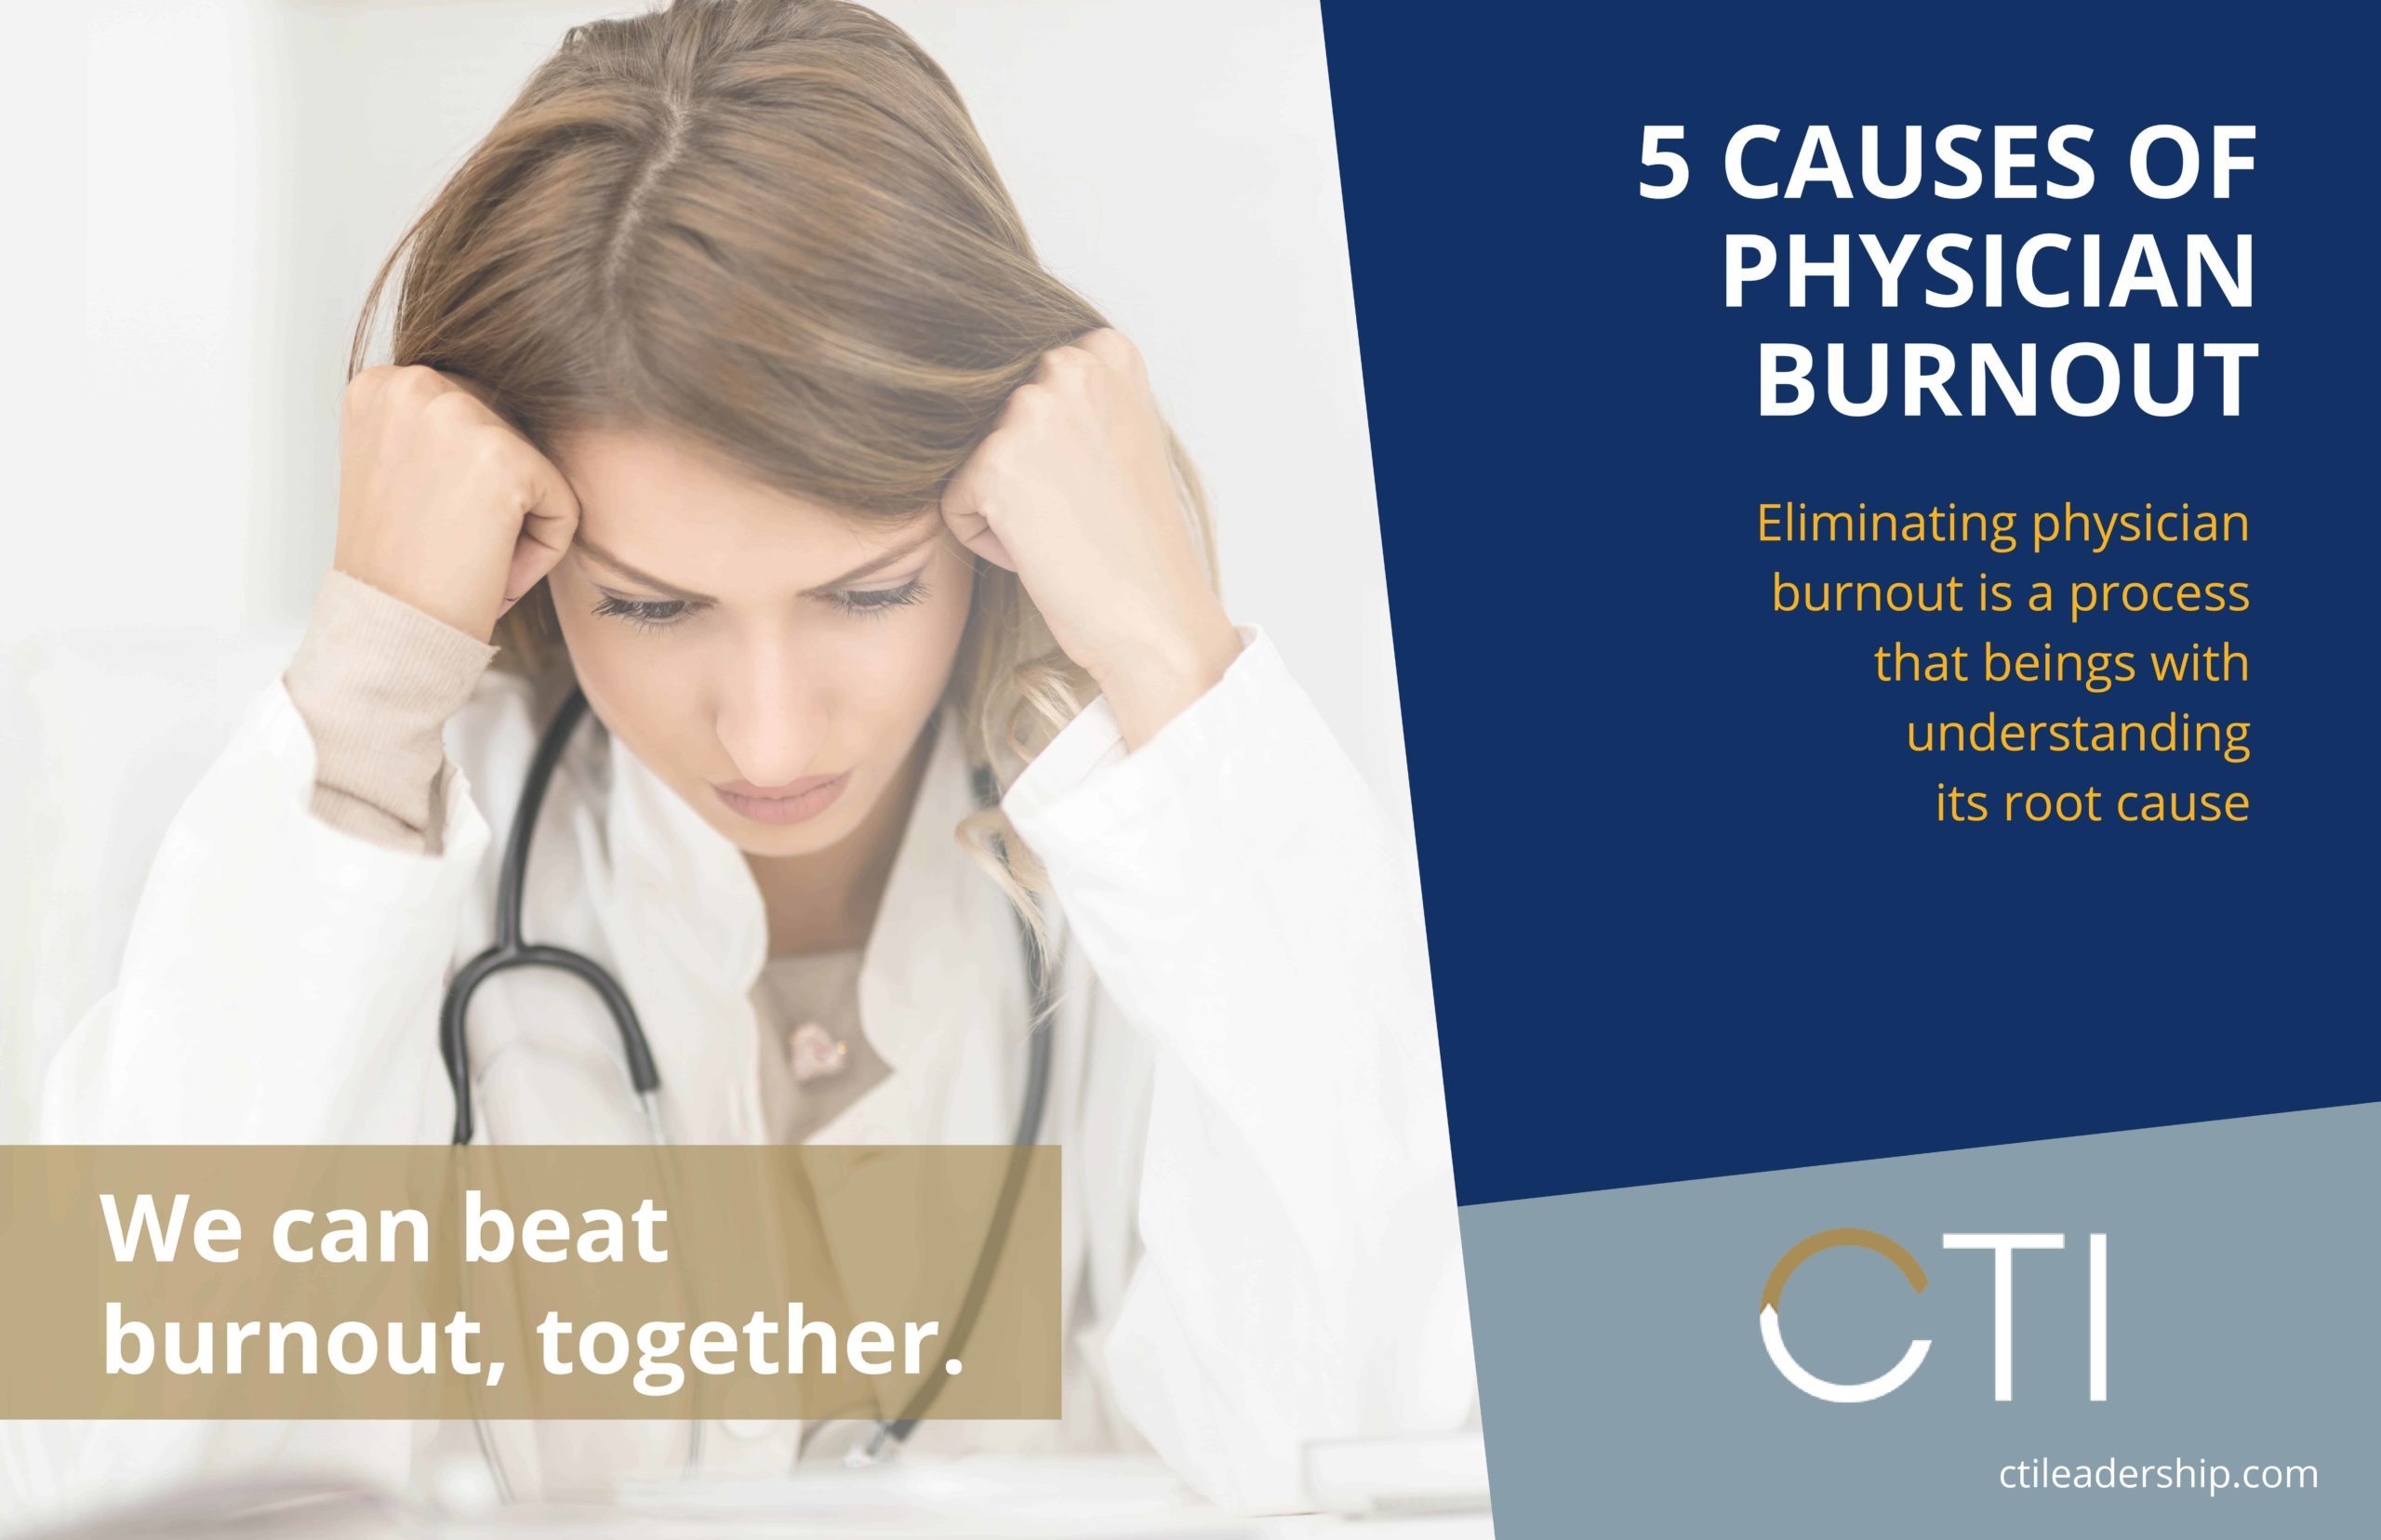 5 causes of physician burnout